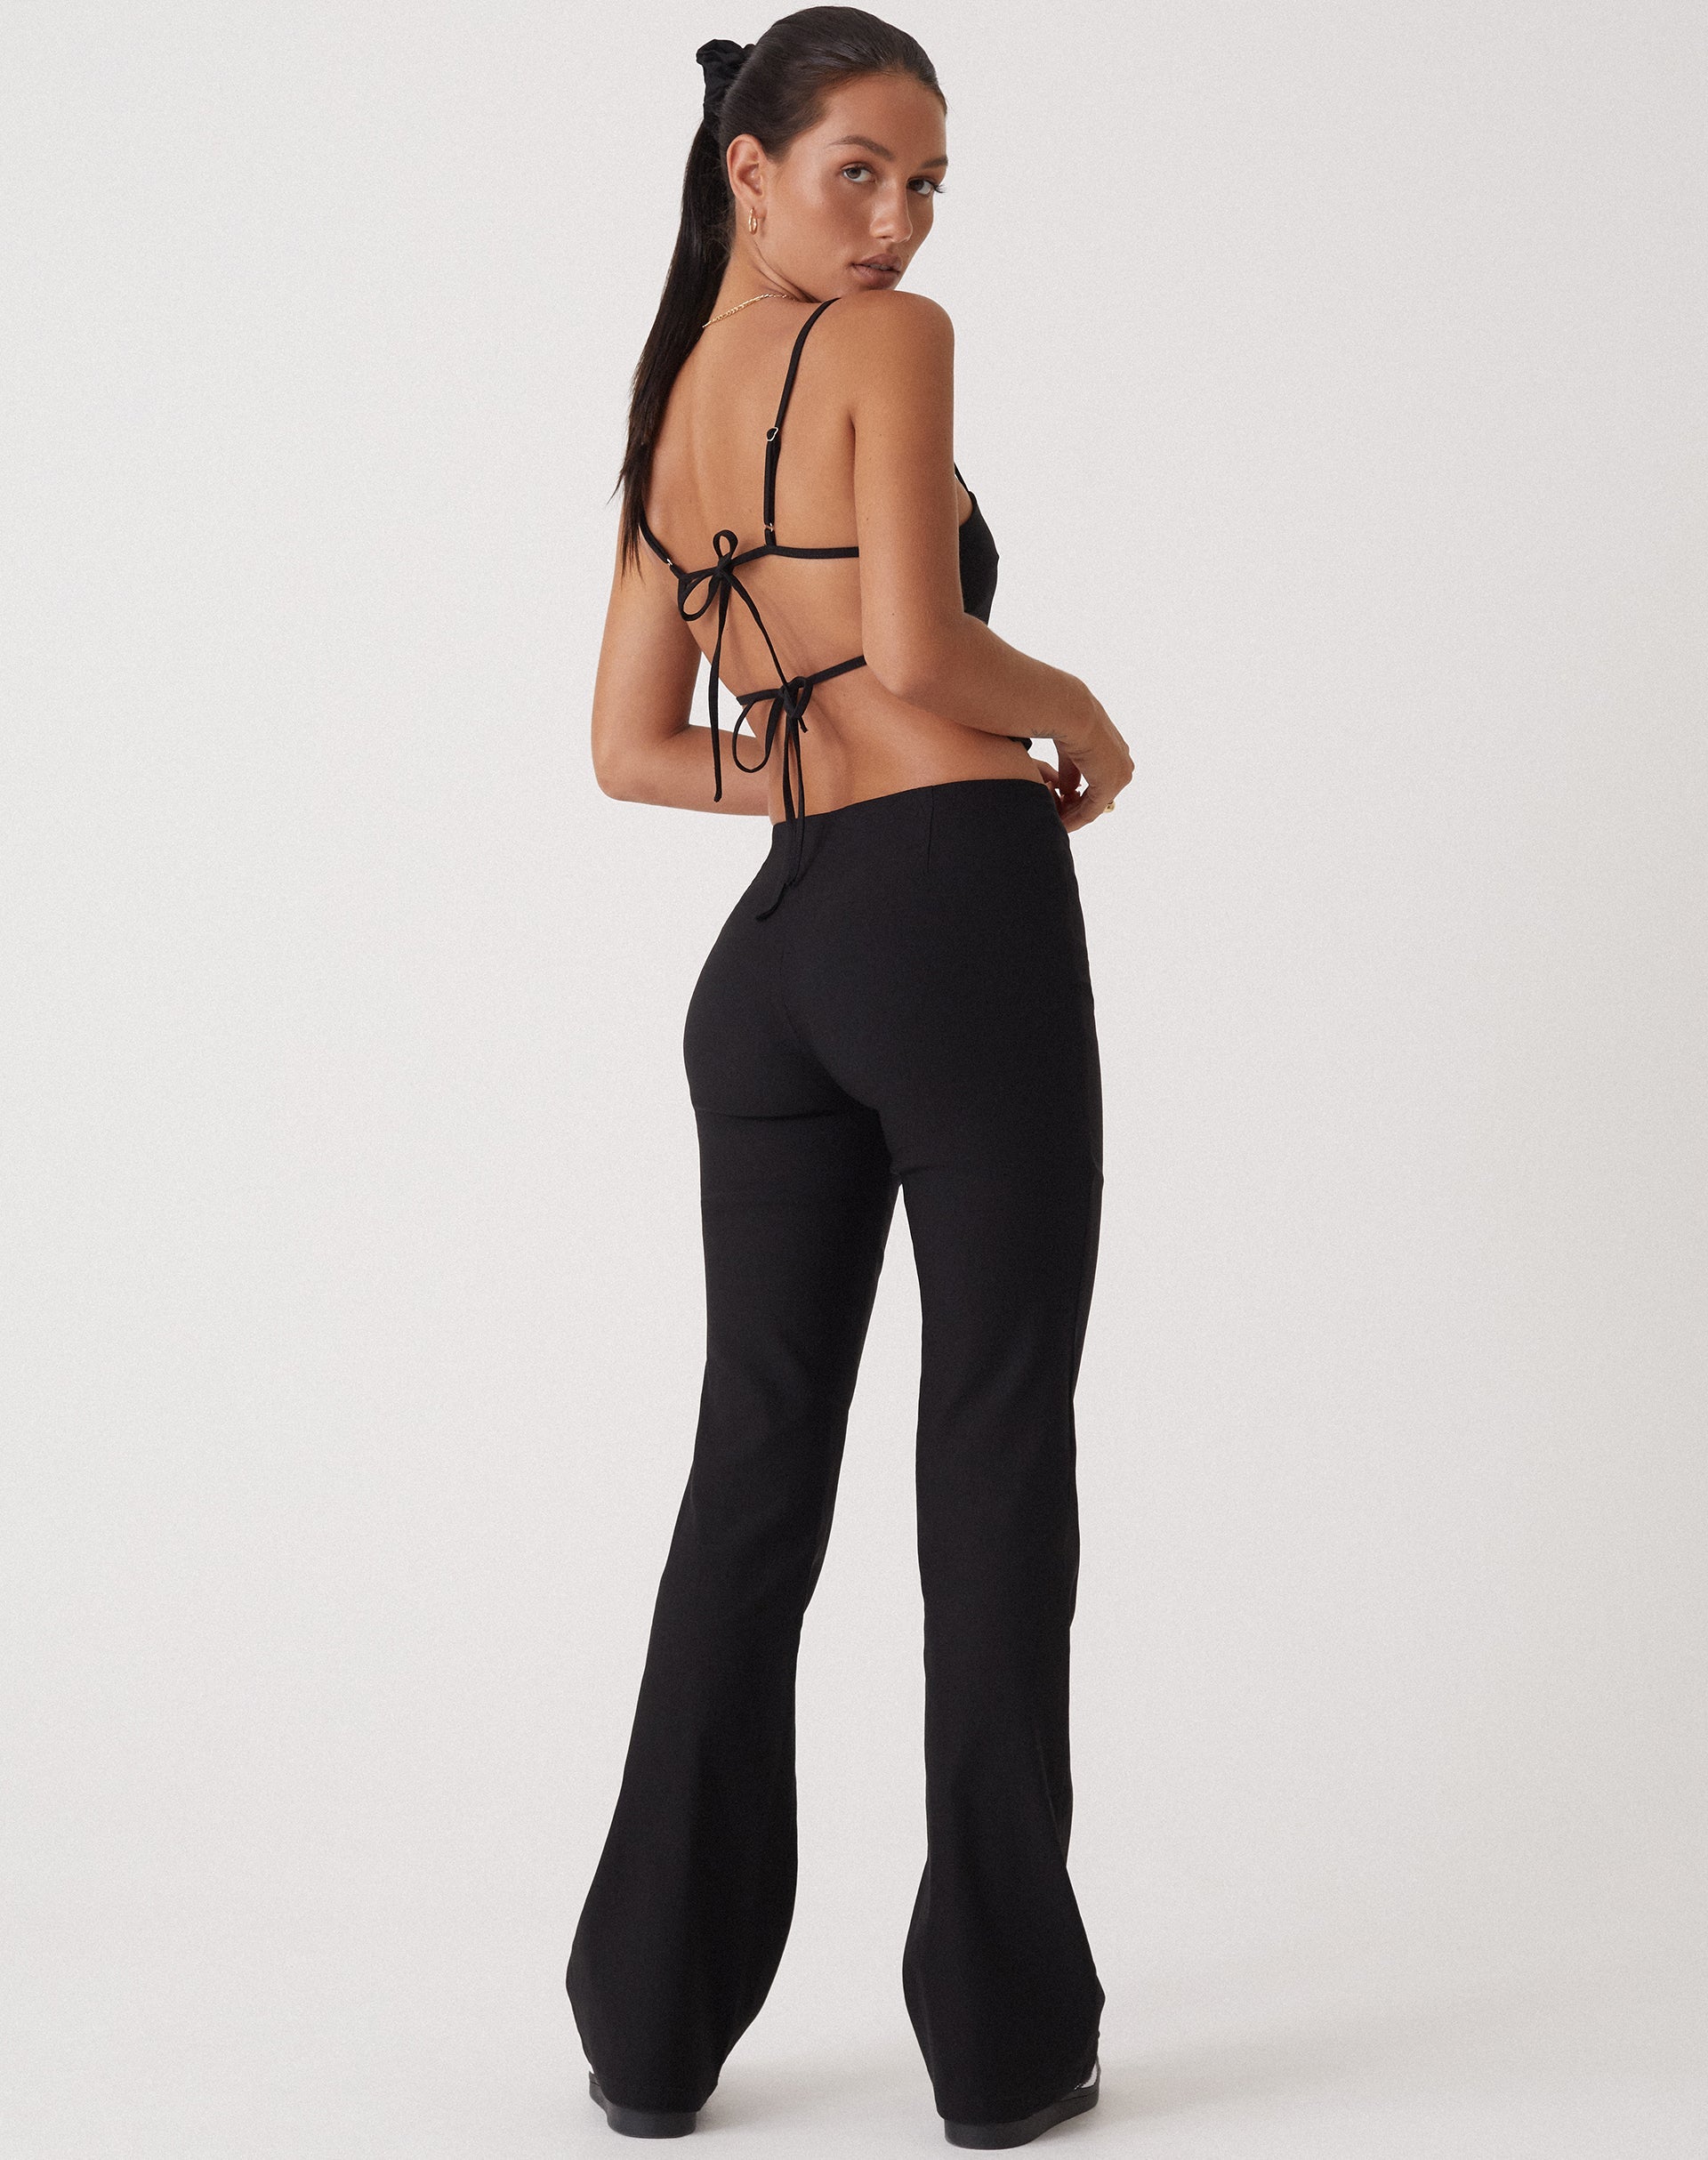 image of MOTEL X OLIVIA NEILL Levin Flared Leg Trouser in Tailoring Black